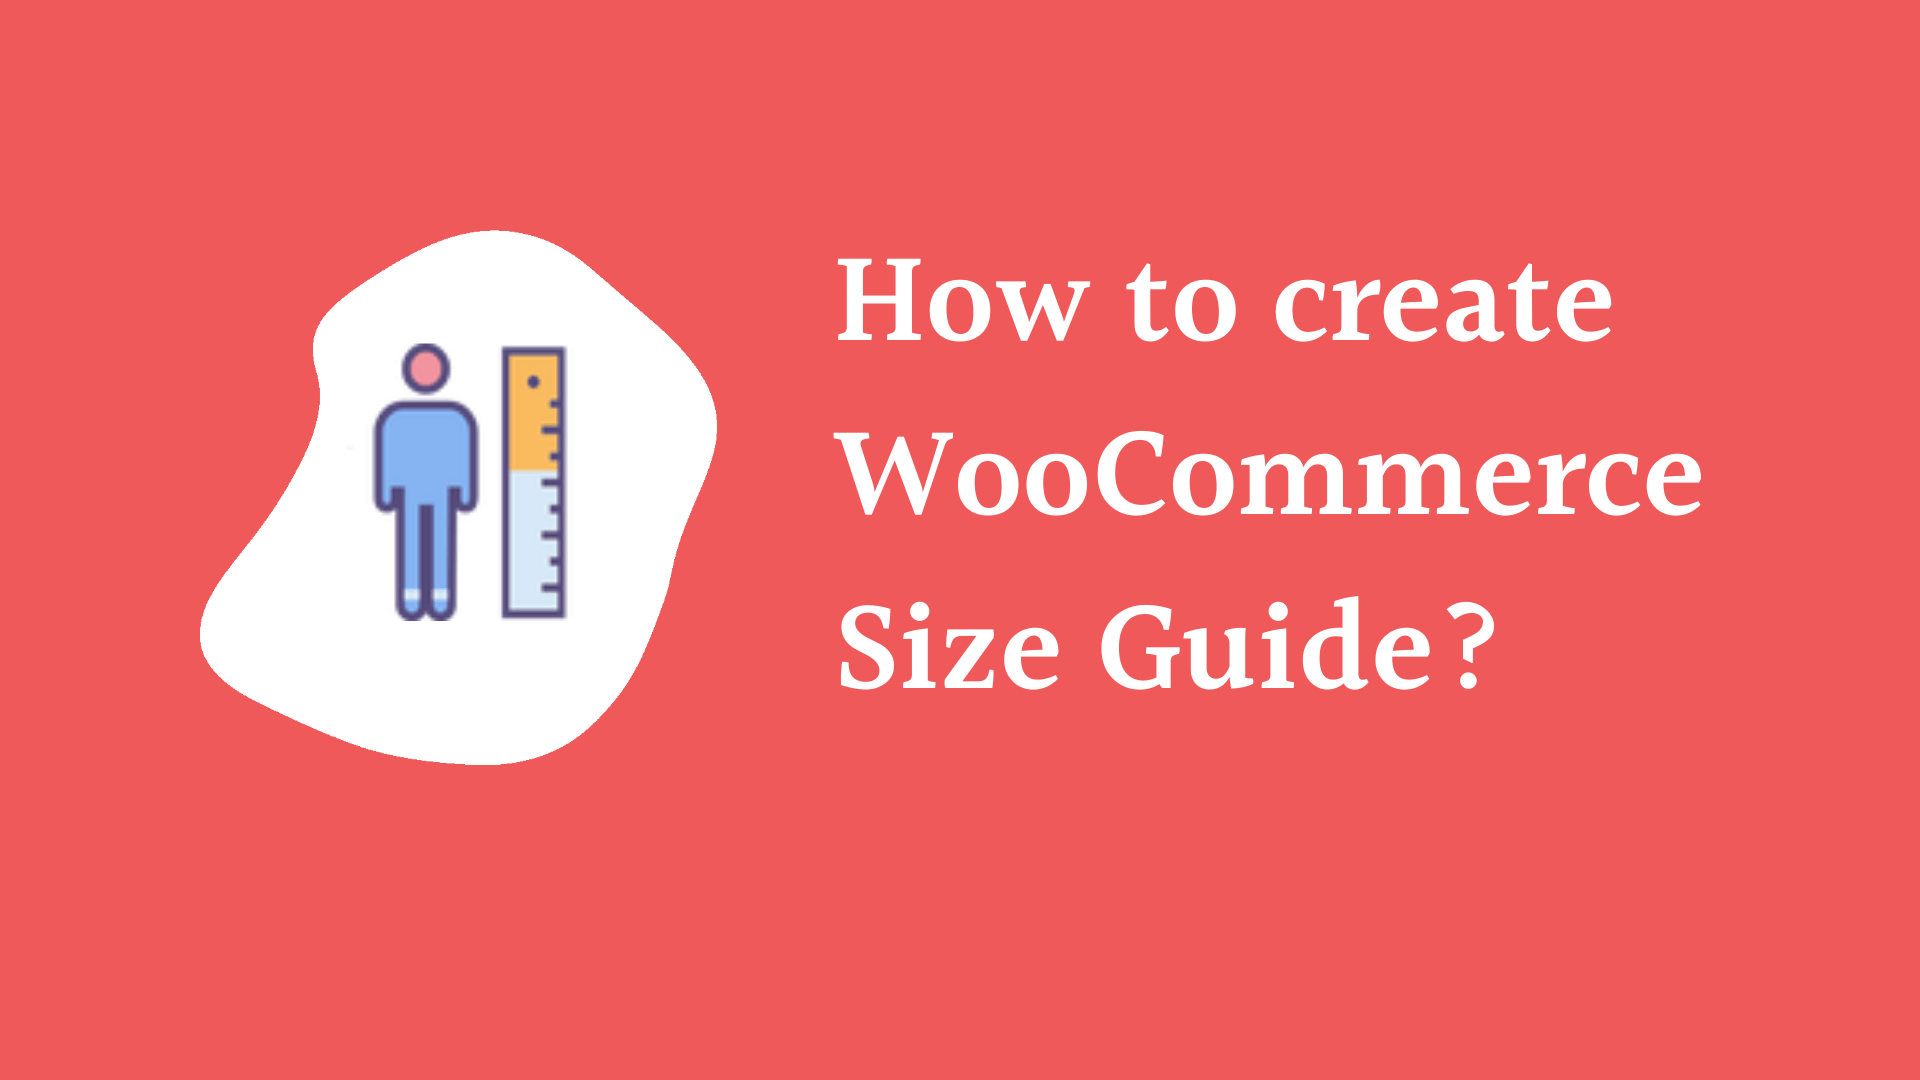 How to create a WooCommerce size guide?